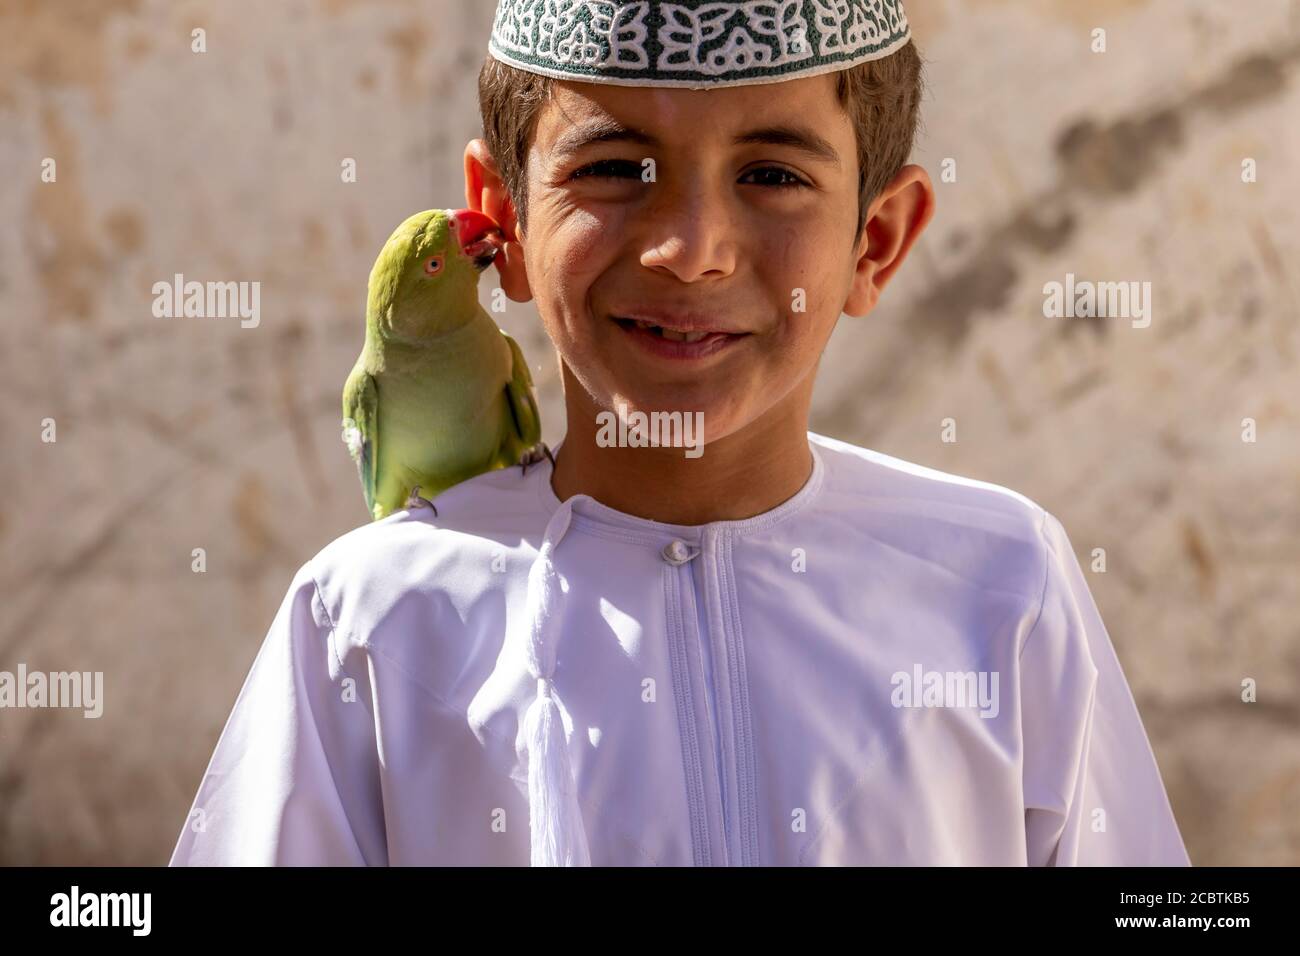 An Omani boy holding his pet parrot on his shoulder Stock Photo